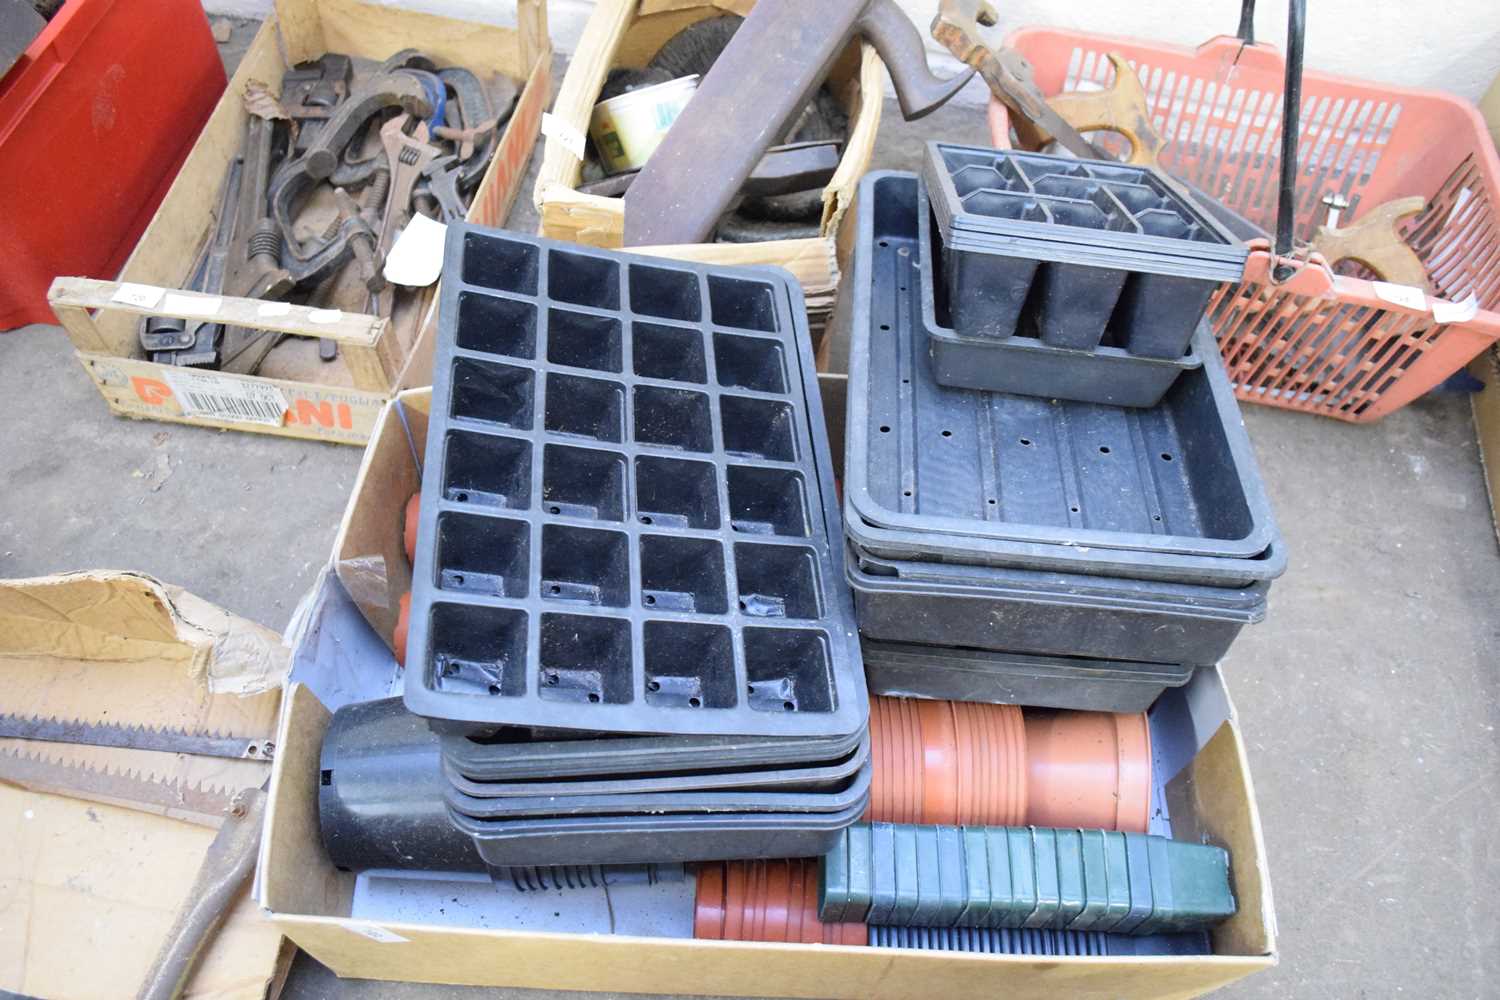 BOX OF PLANT POTS AND SEED TRAYS